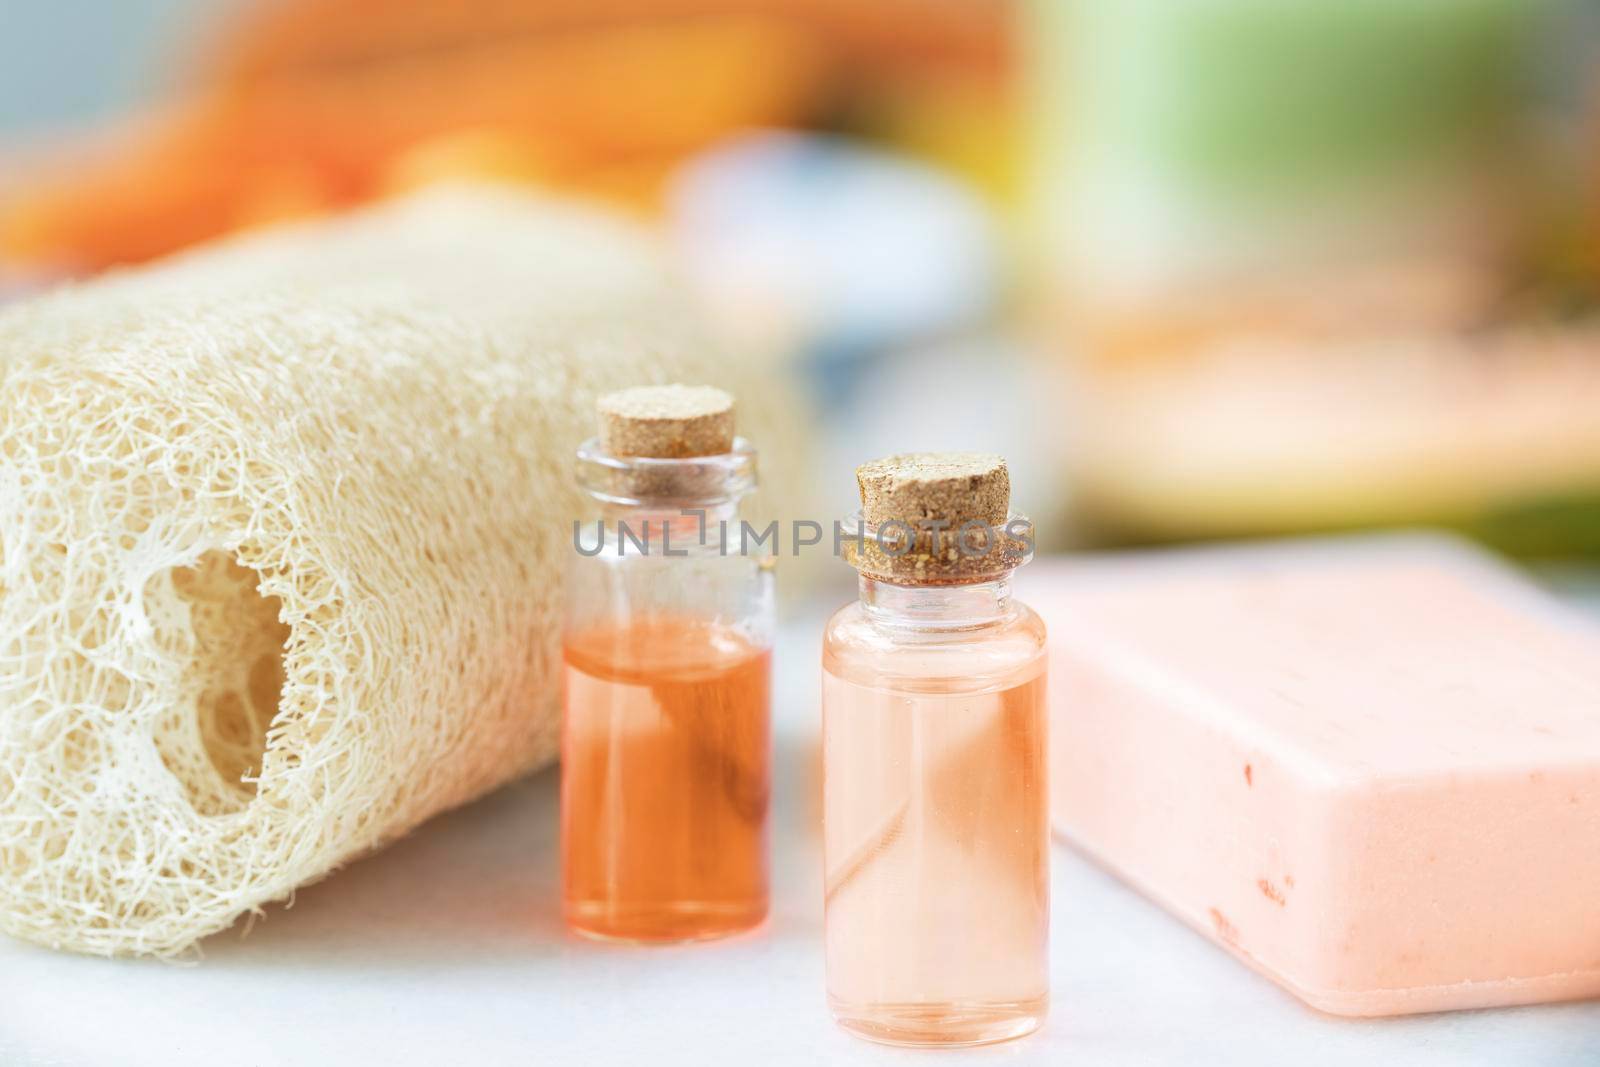 Two small bottles of fruit extracts with soap and loofa sponge.